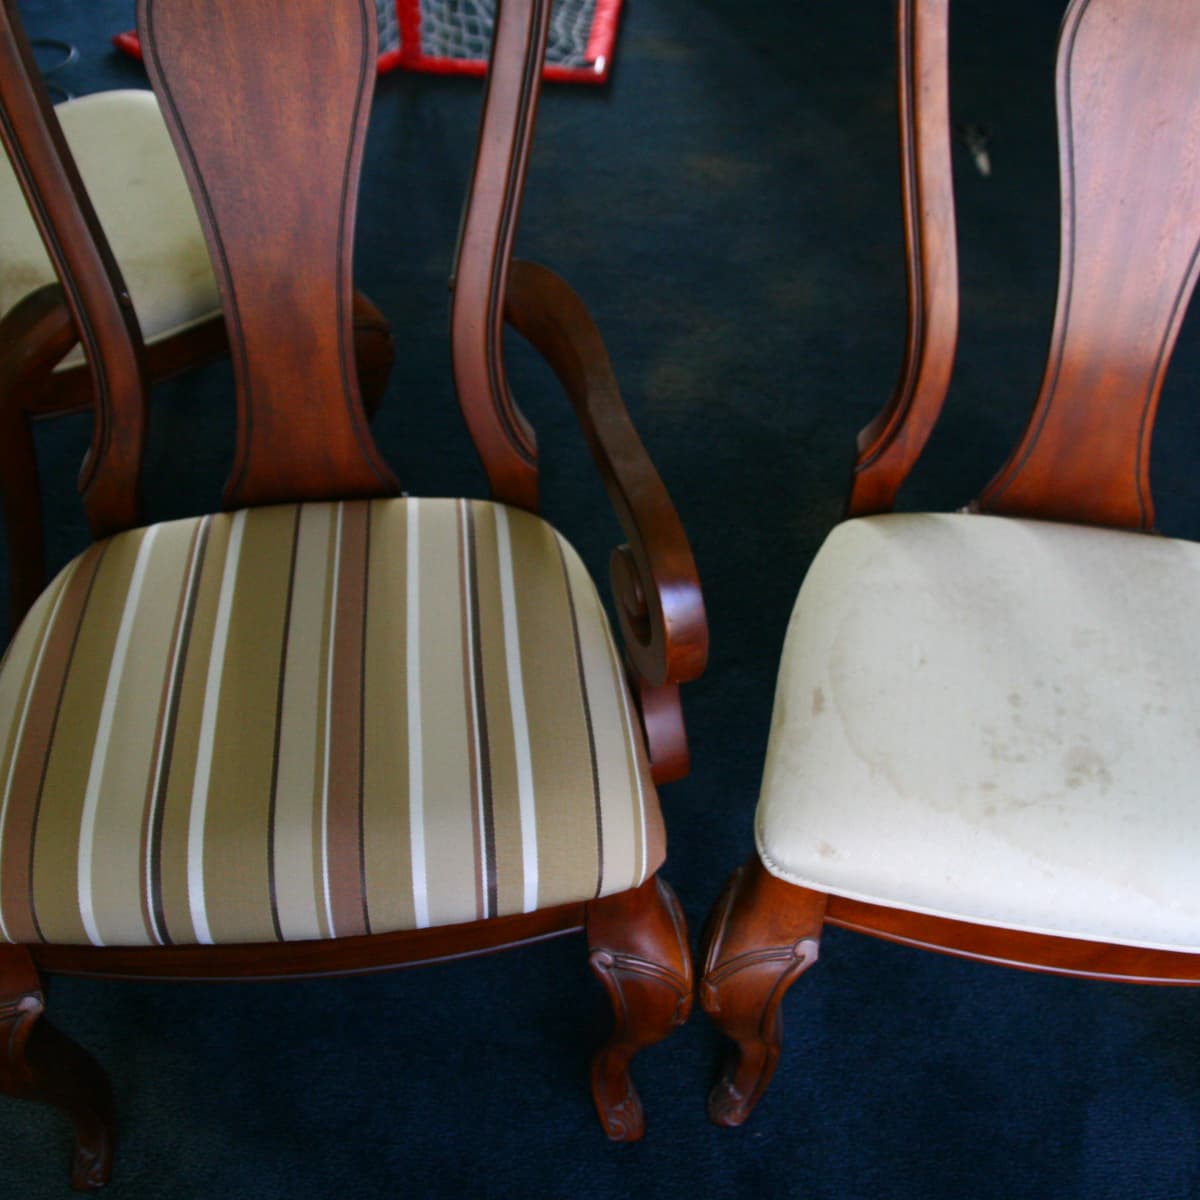 How To Reupholster A Dining Room Chair, Recover Dining Room Chair With Vinyl Back